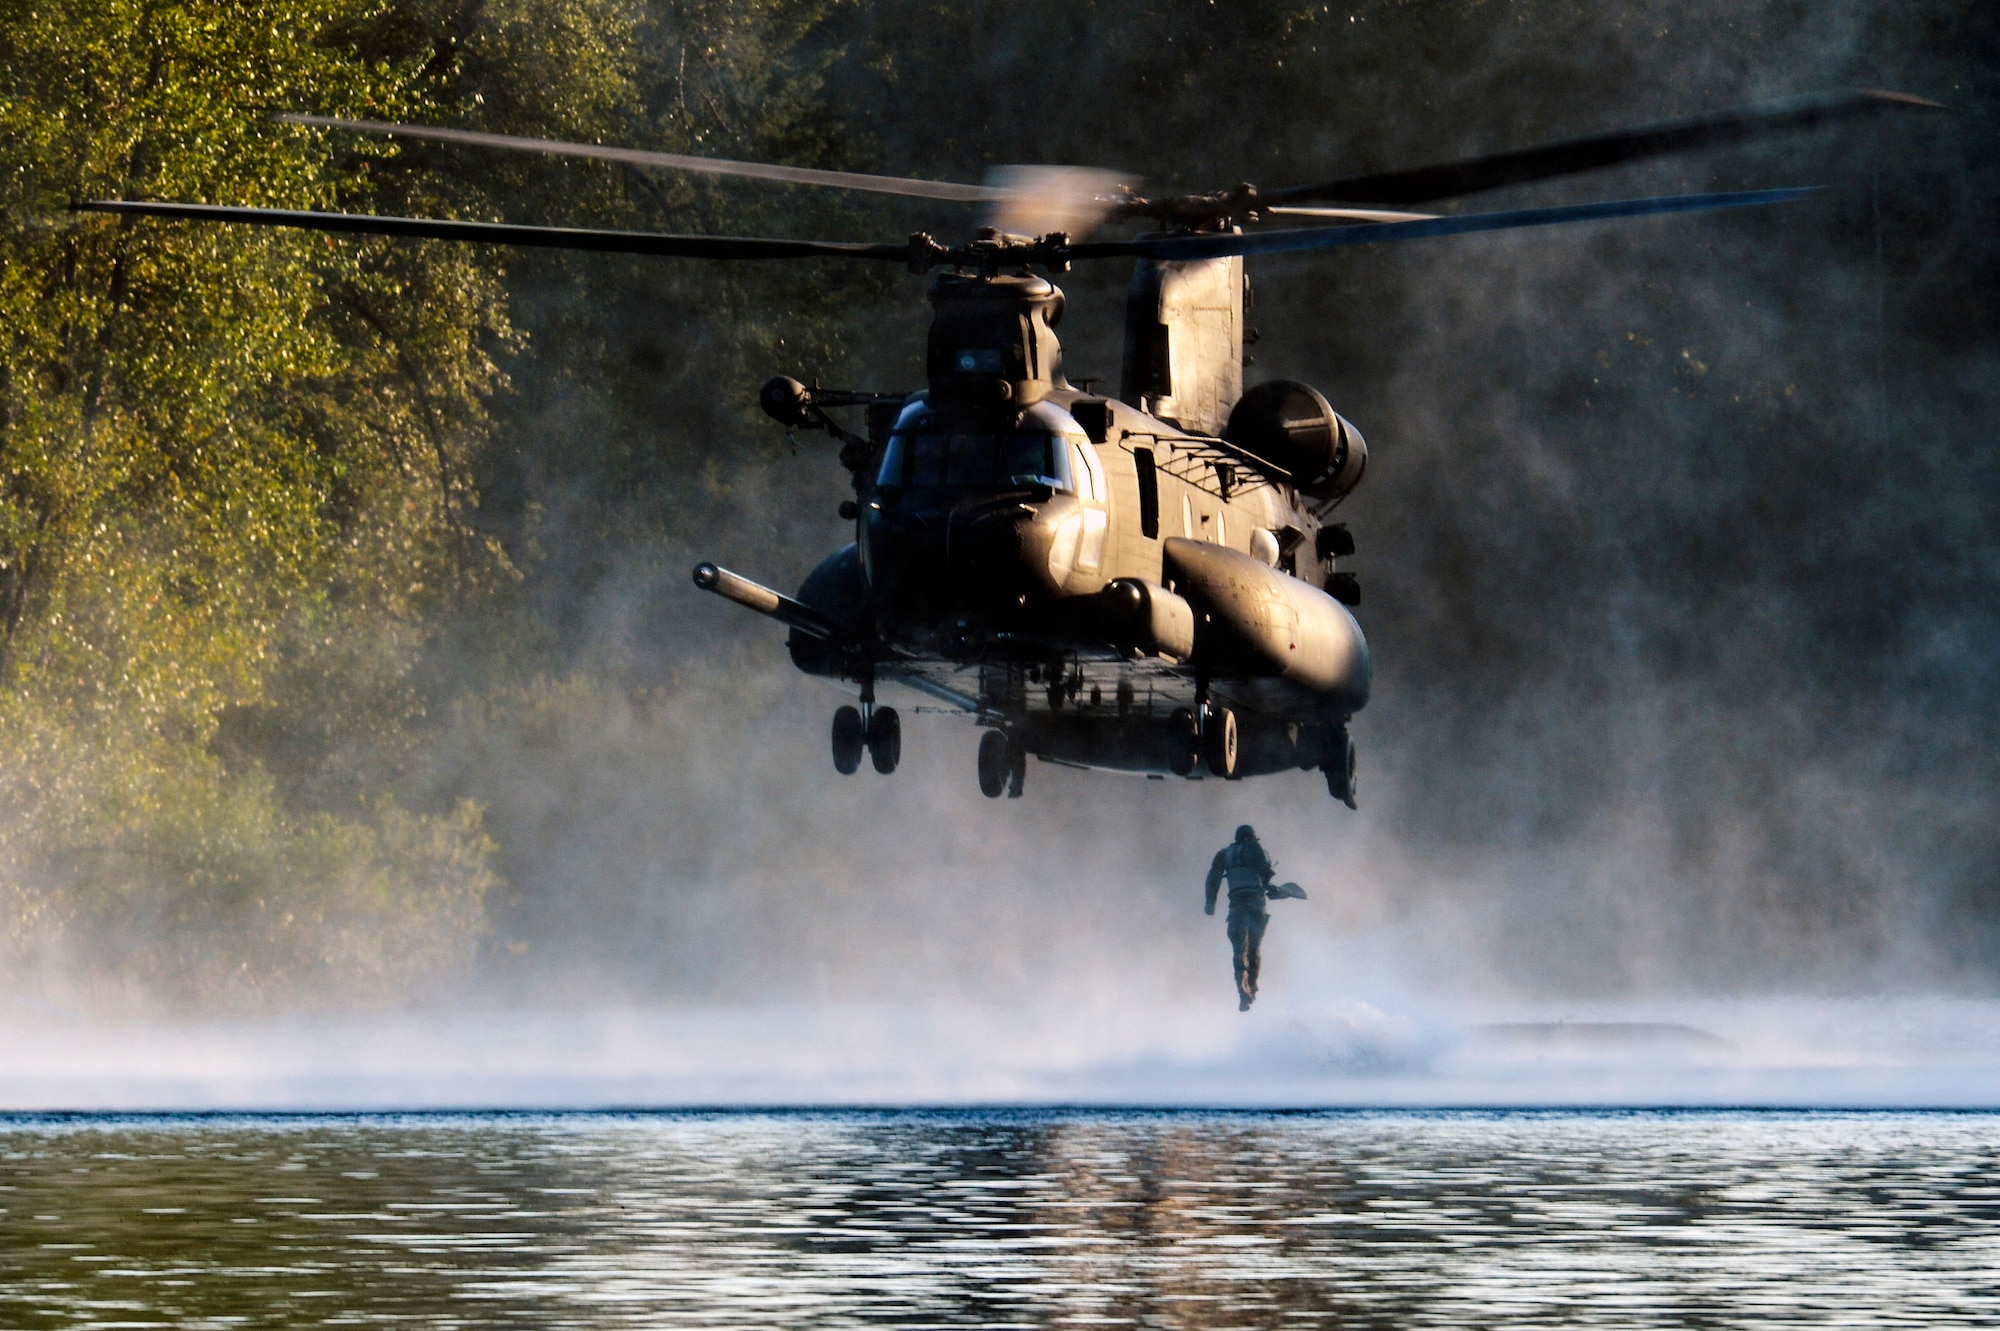 An Airman from the 22nd Special Tactics Squadron’s Red Team jumps out of an MH-47 Chinook helicopter July 14, 2014, during helocast alternate insertion and extraction training with Soldiers from the 160th Special Operations Aviation Regiment at American Lake on Joint Base Lewis-McChord, Wash. Helocasting is an airborne technique used by special operations forces units for amphibious insertion into a military area of operation. (U.S. Air Force photo/Staff Sgt.Russ Jackson)